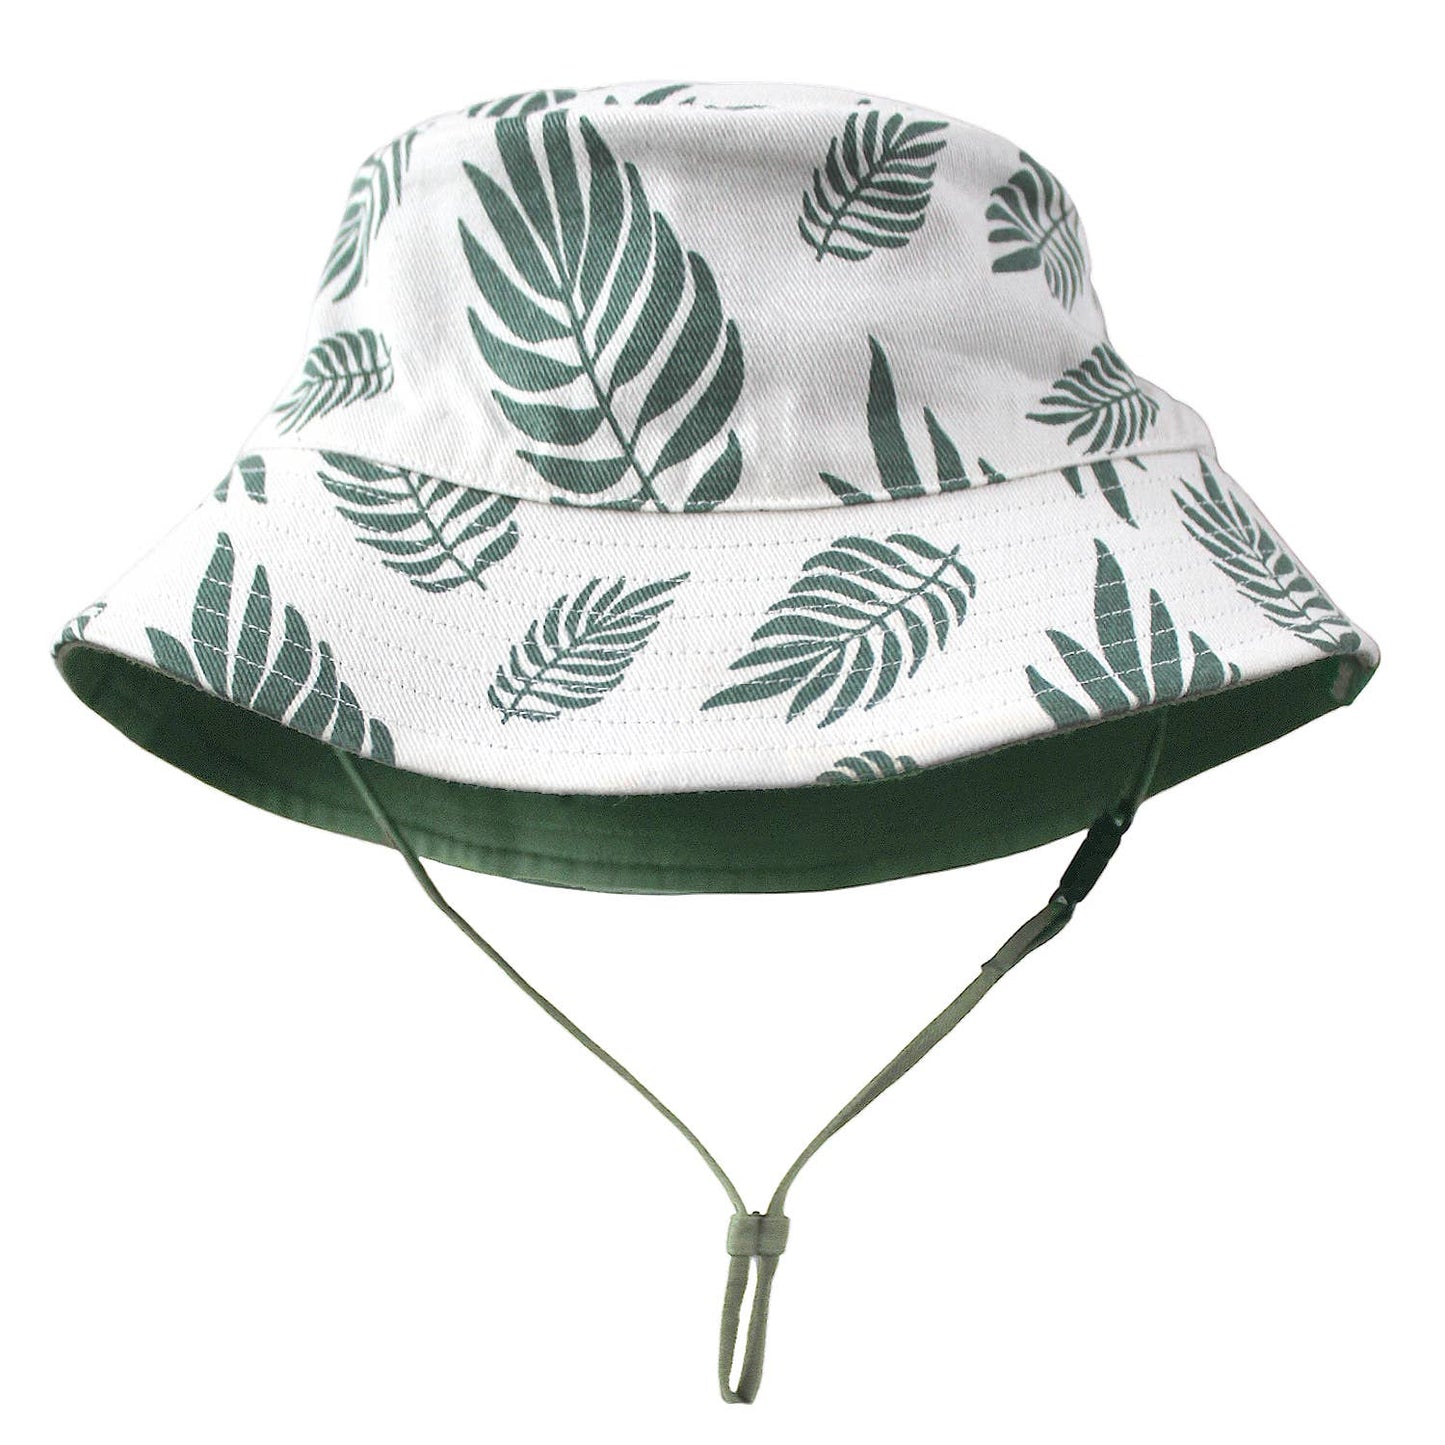 Reversible Organic Cotton Bucket Hats - Palm Leaves and Camper Green